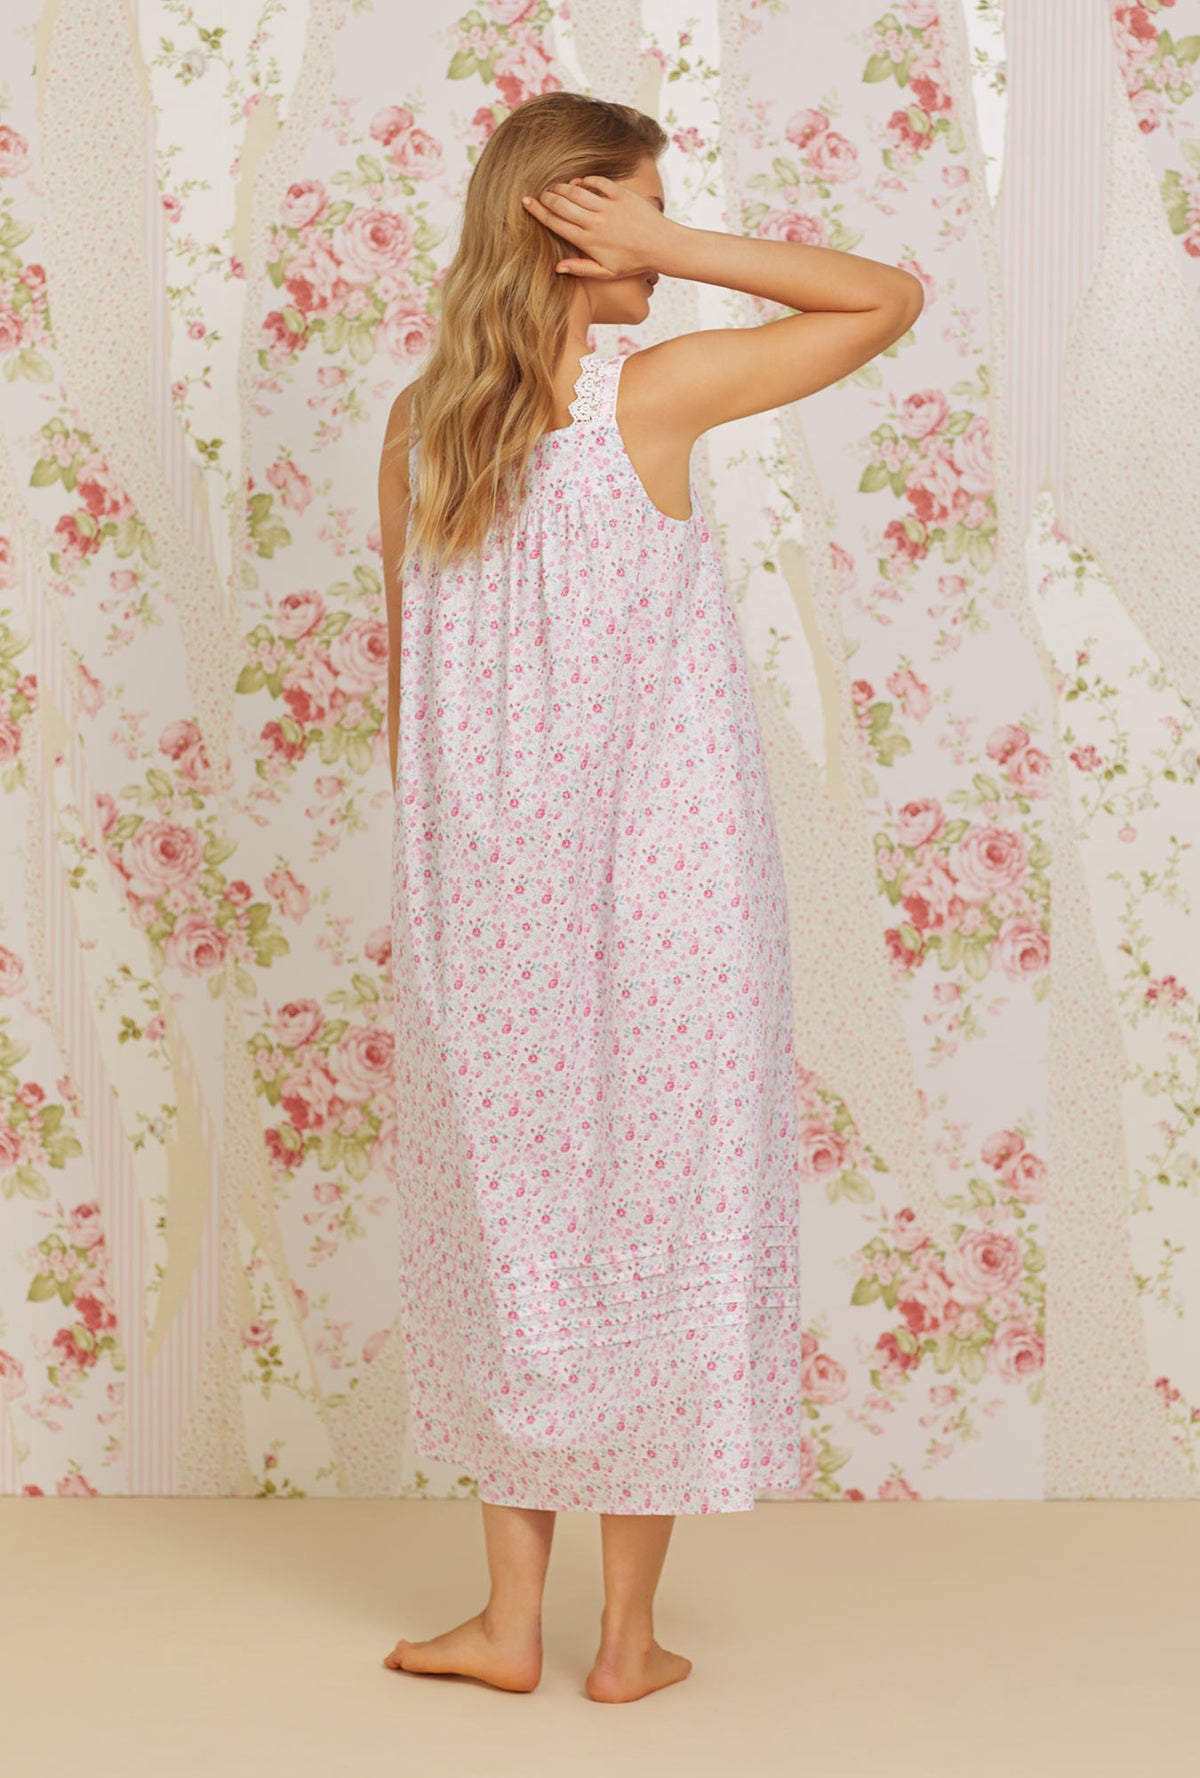 A lady wearing pink sleeveless elizabeth cotton woven nightgown with secret garden print.